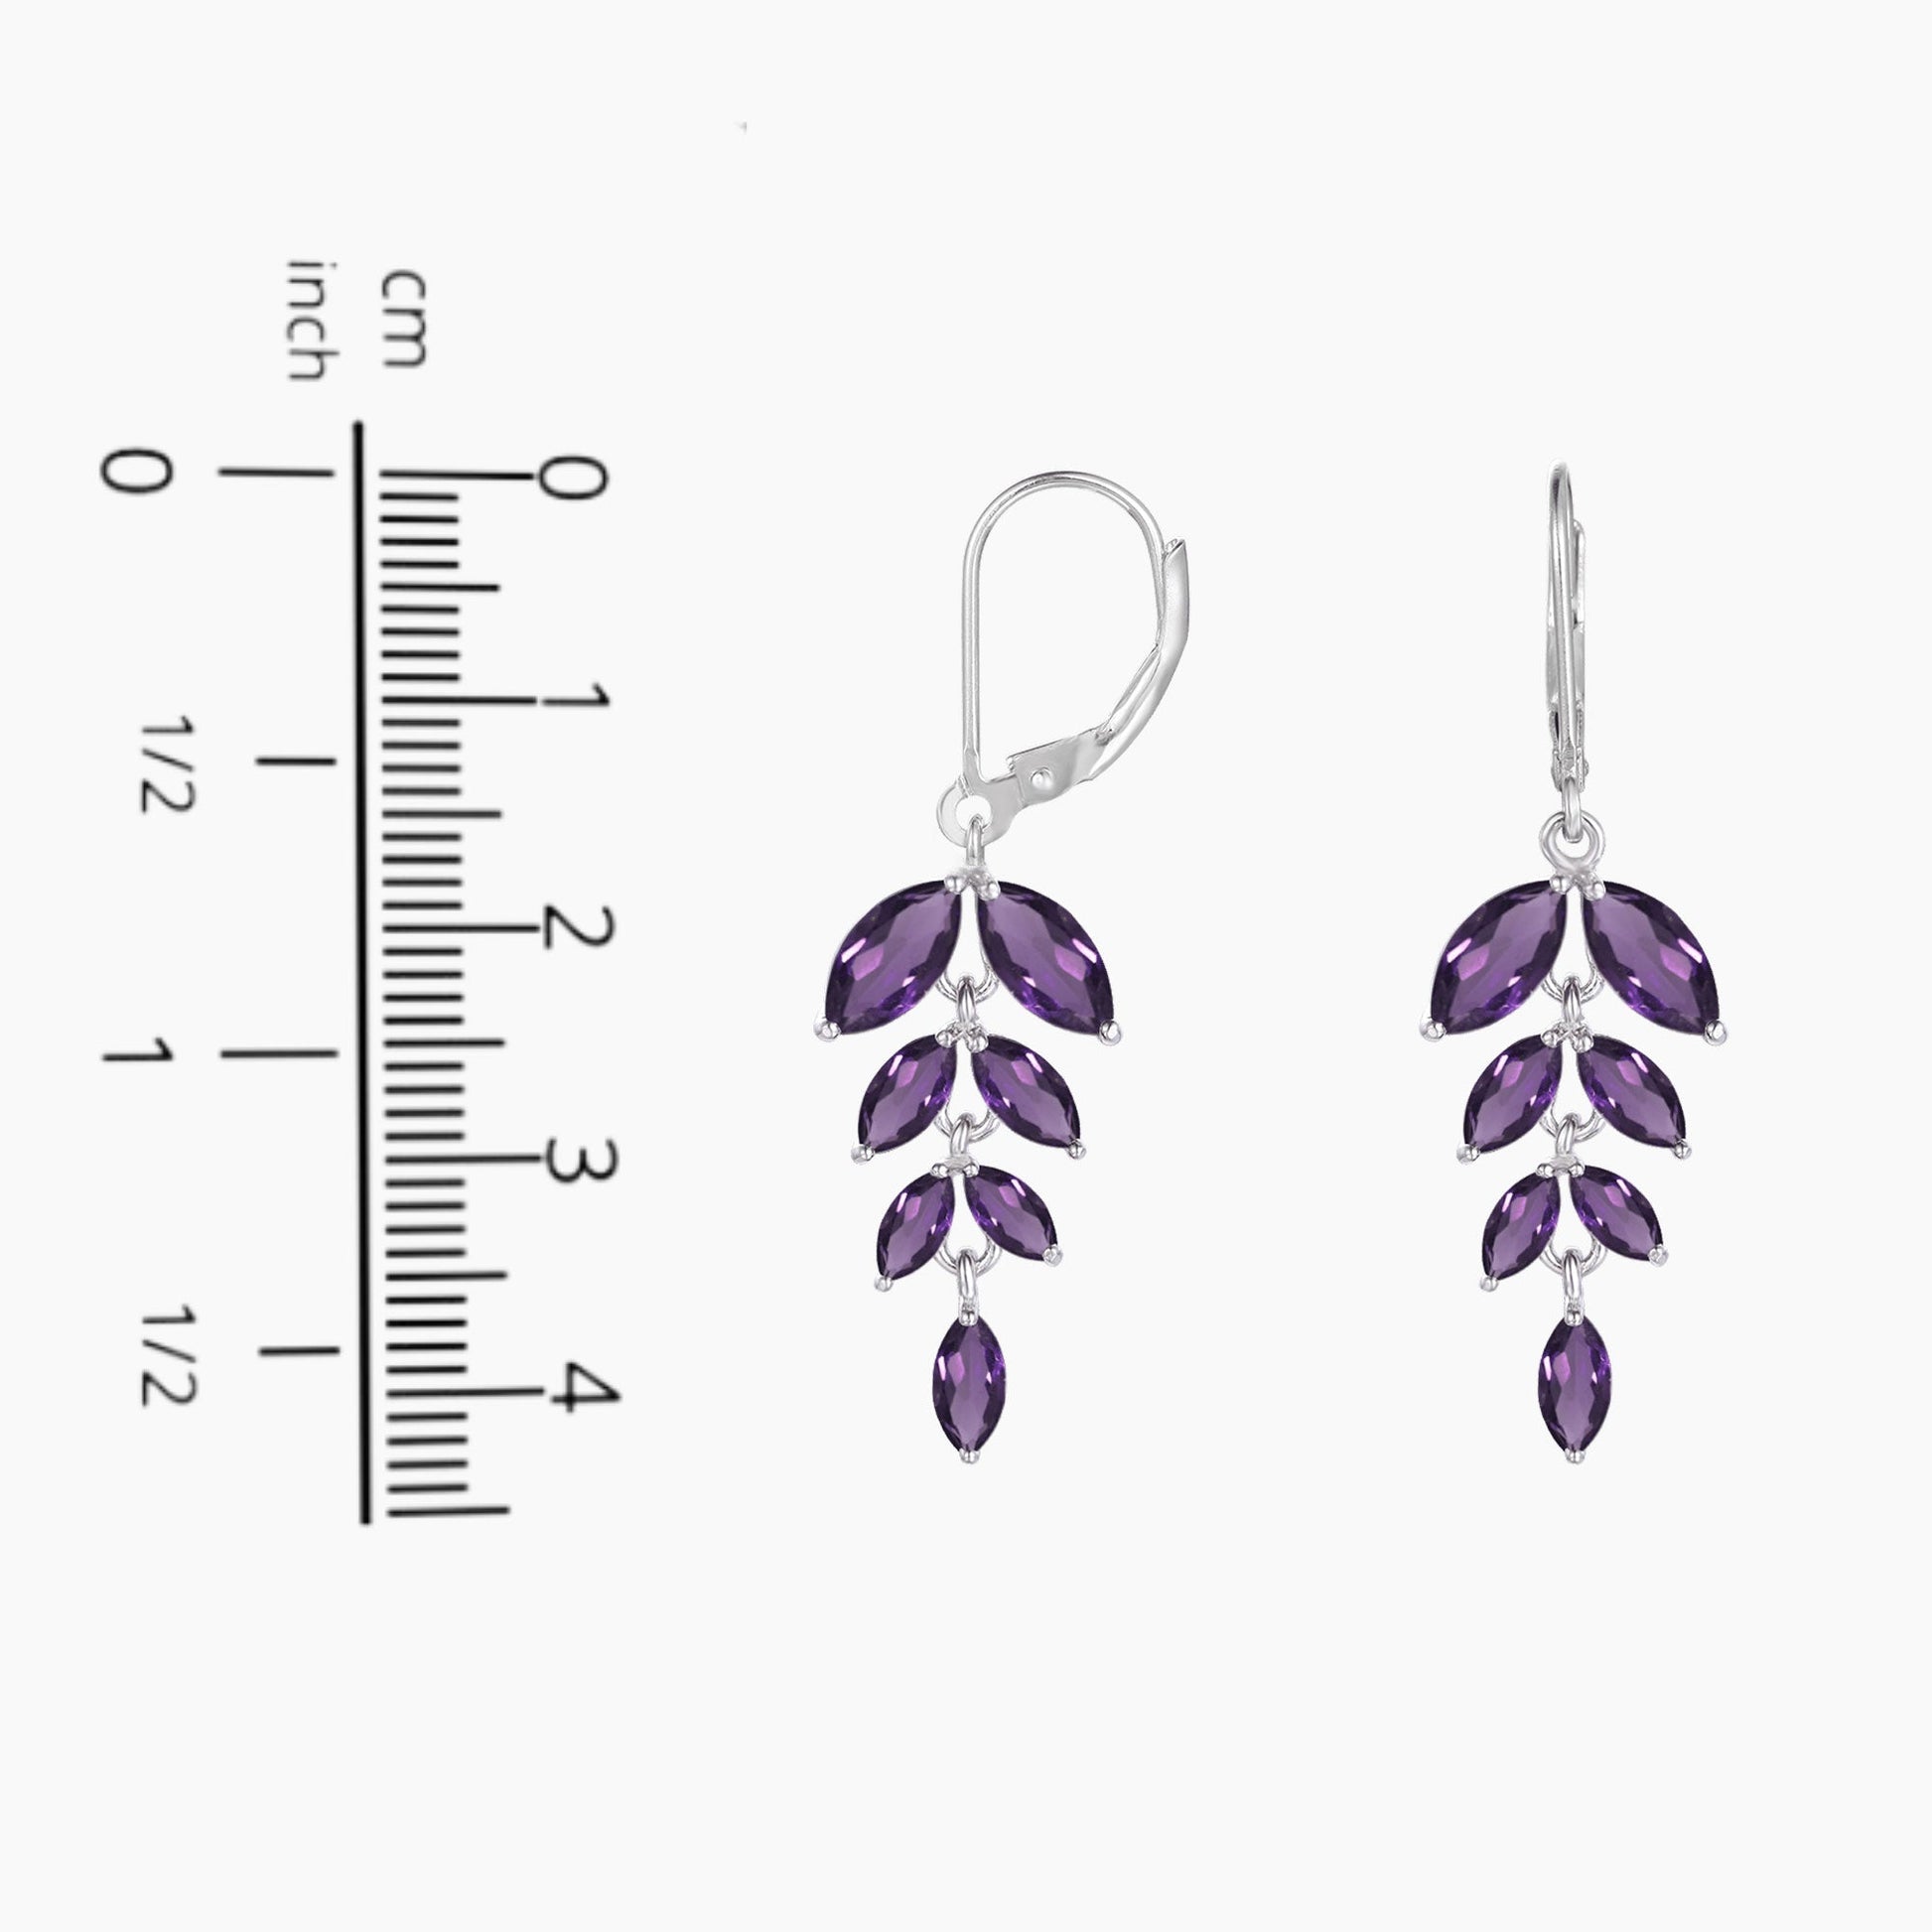 earrings in comparison to a scale